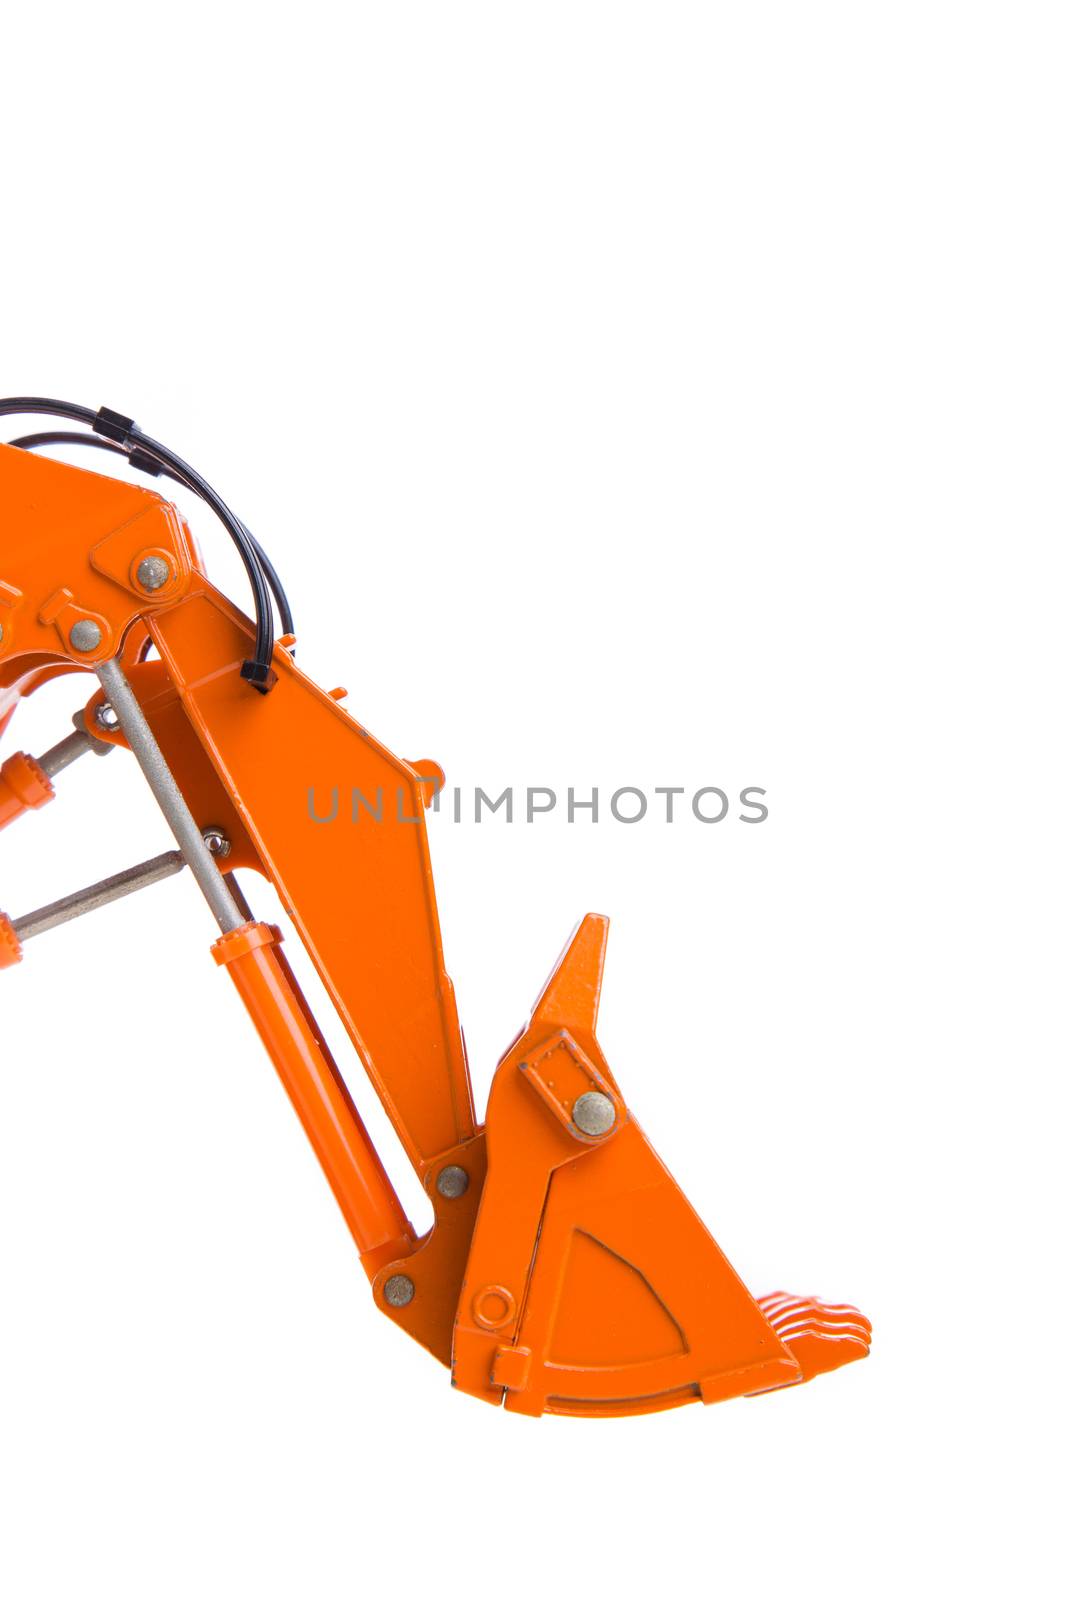 Digger excavator arm by tehcheesiong